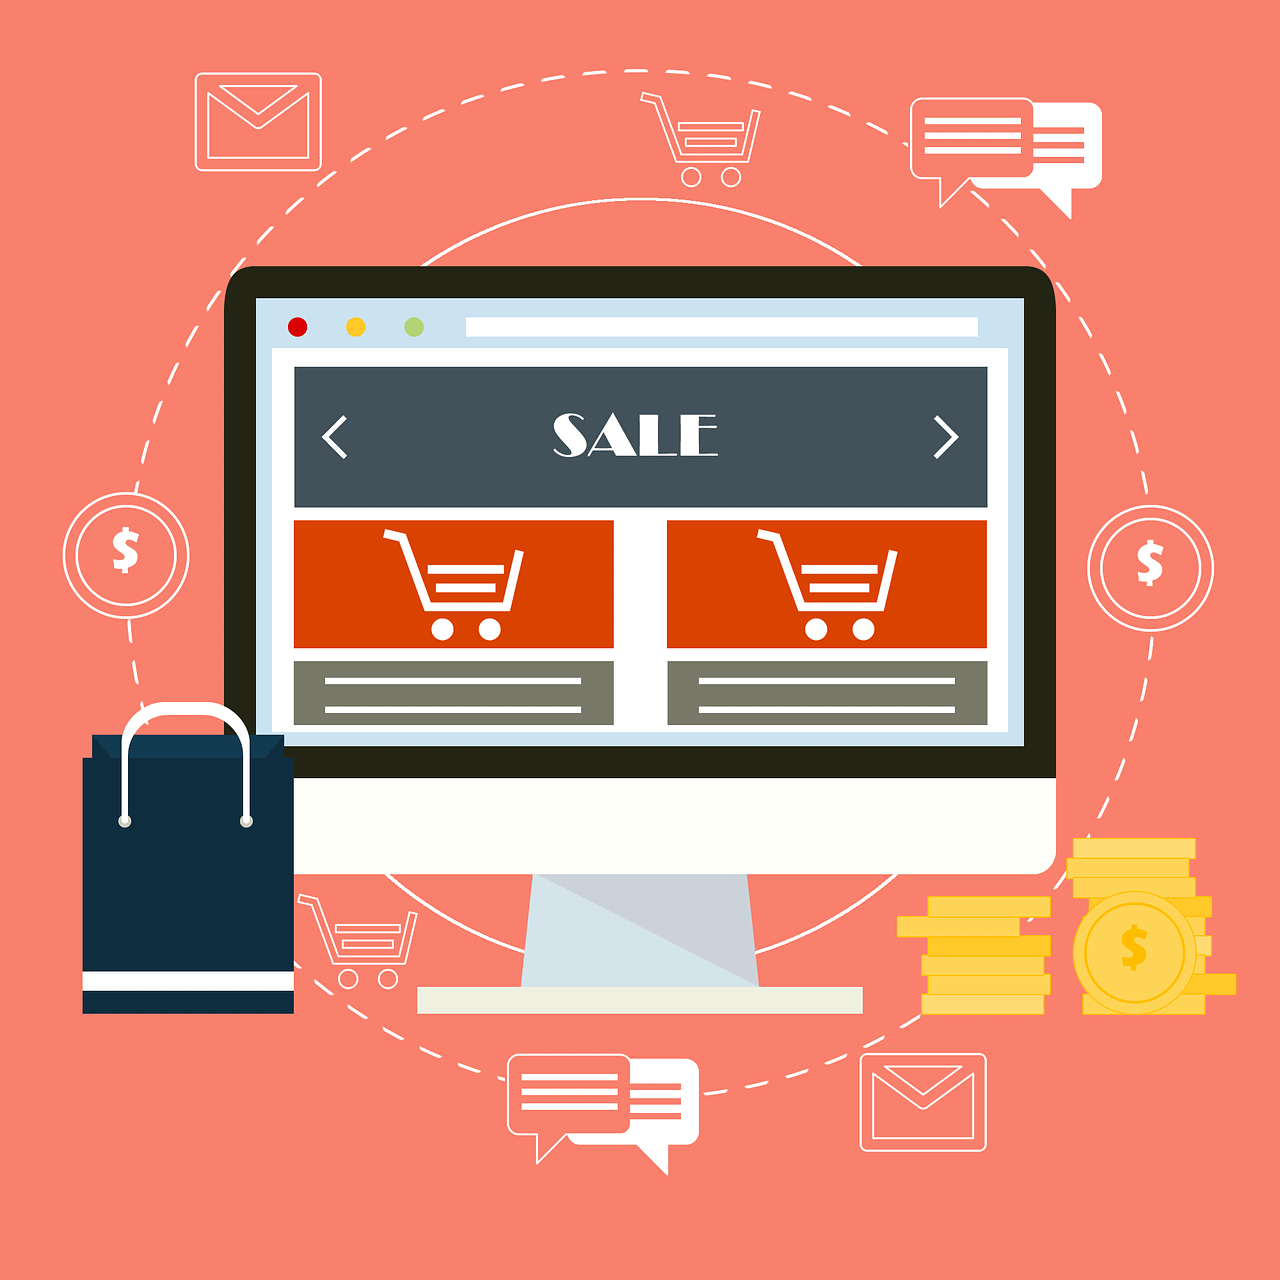 Online B2B Marketplaces are a great way to expand your sales channels!